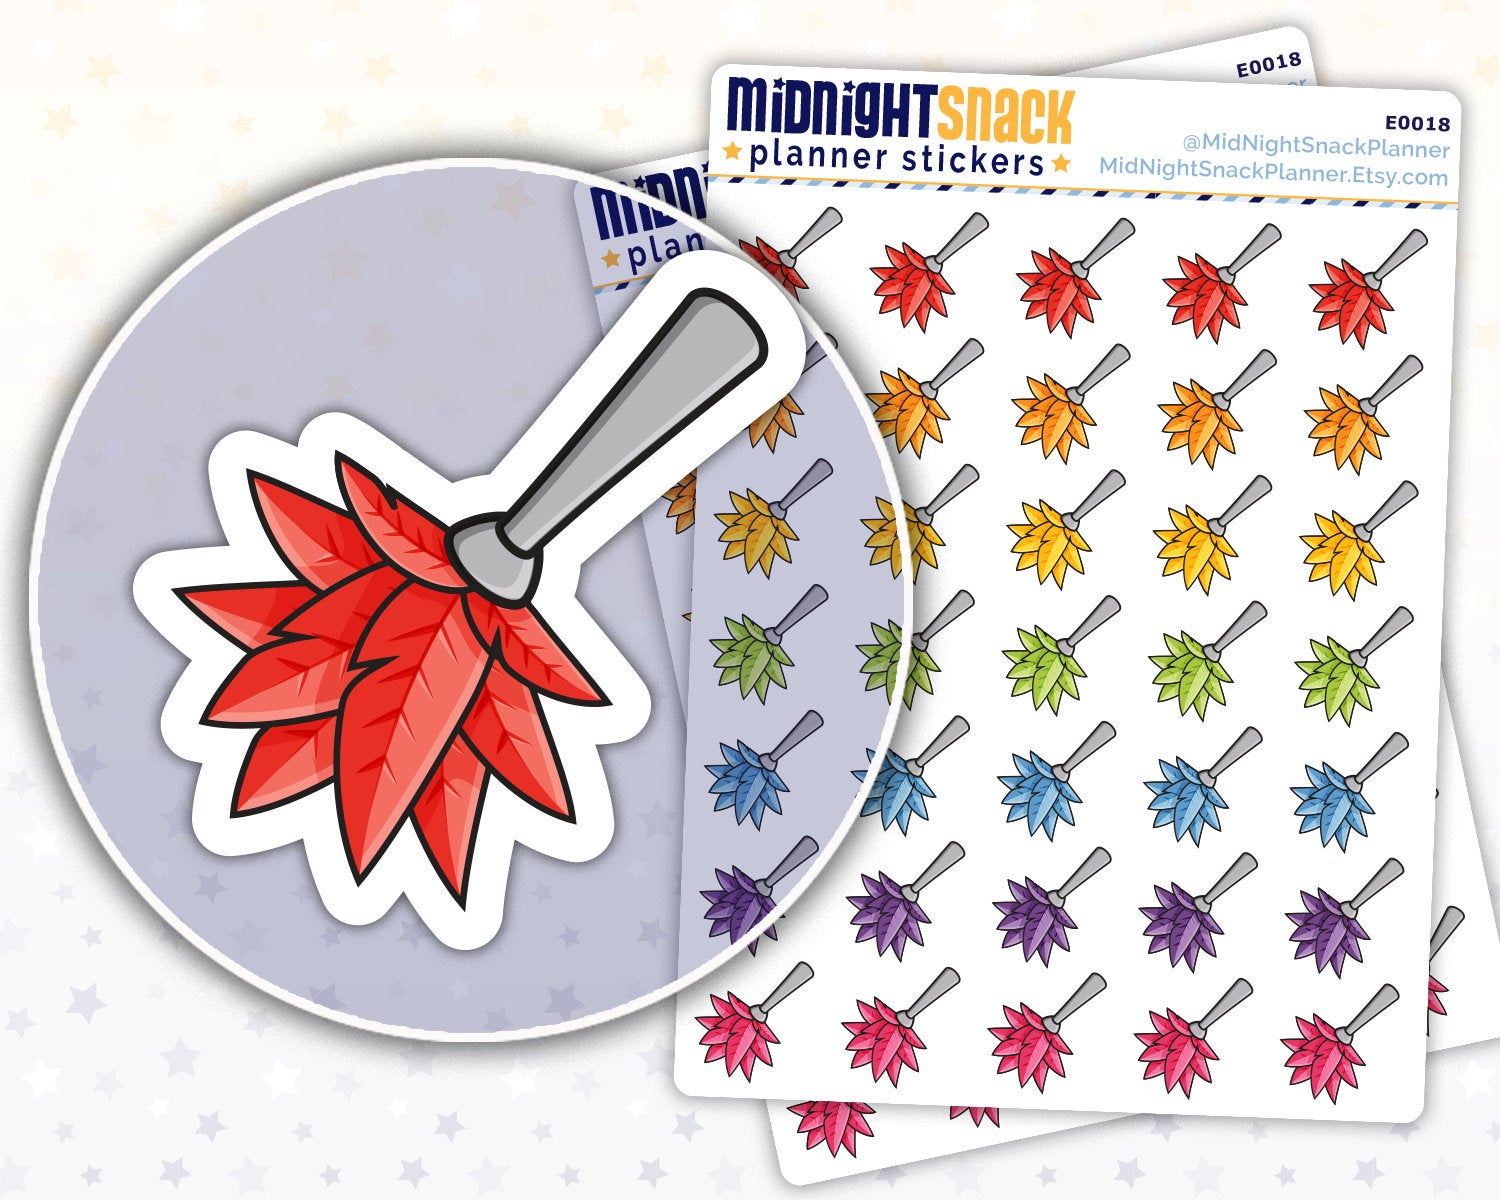 Feather Duster Icon: Cleaning Planner Sticker Midnight Snack Planner